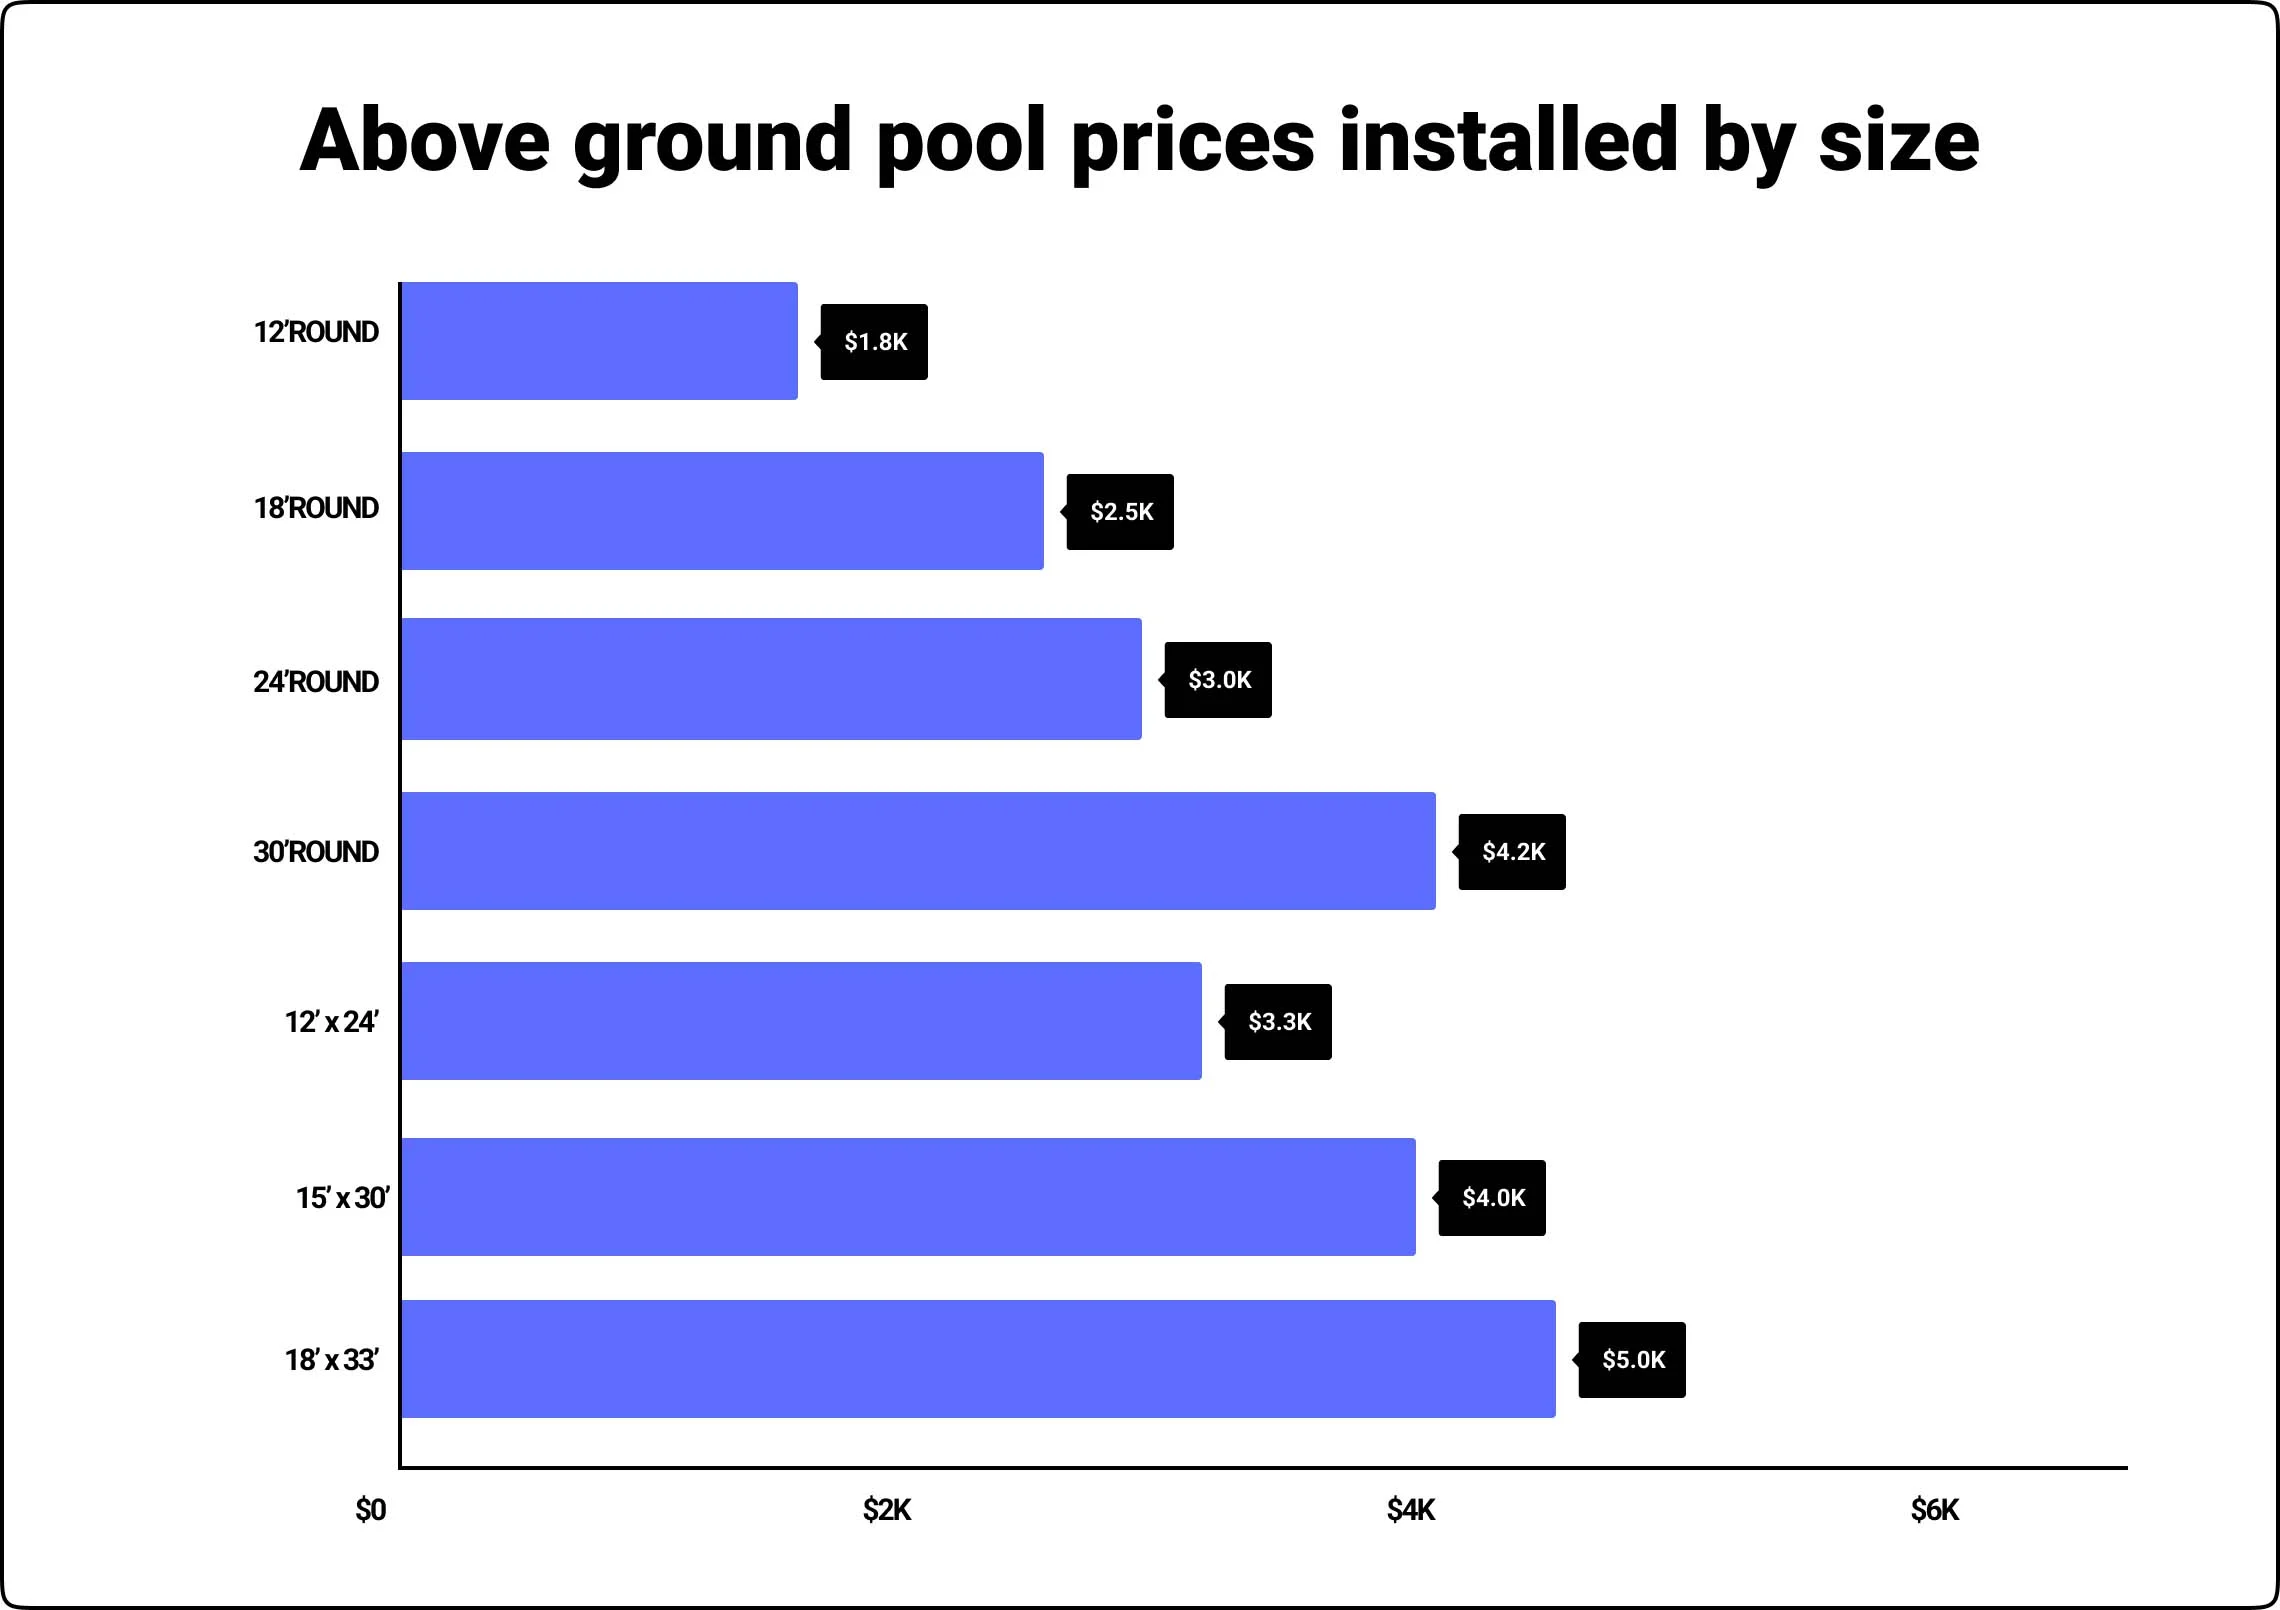 Above ground pool prices by size